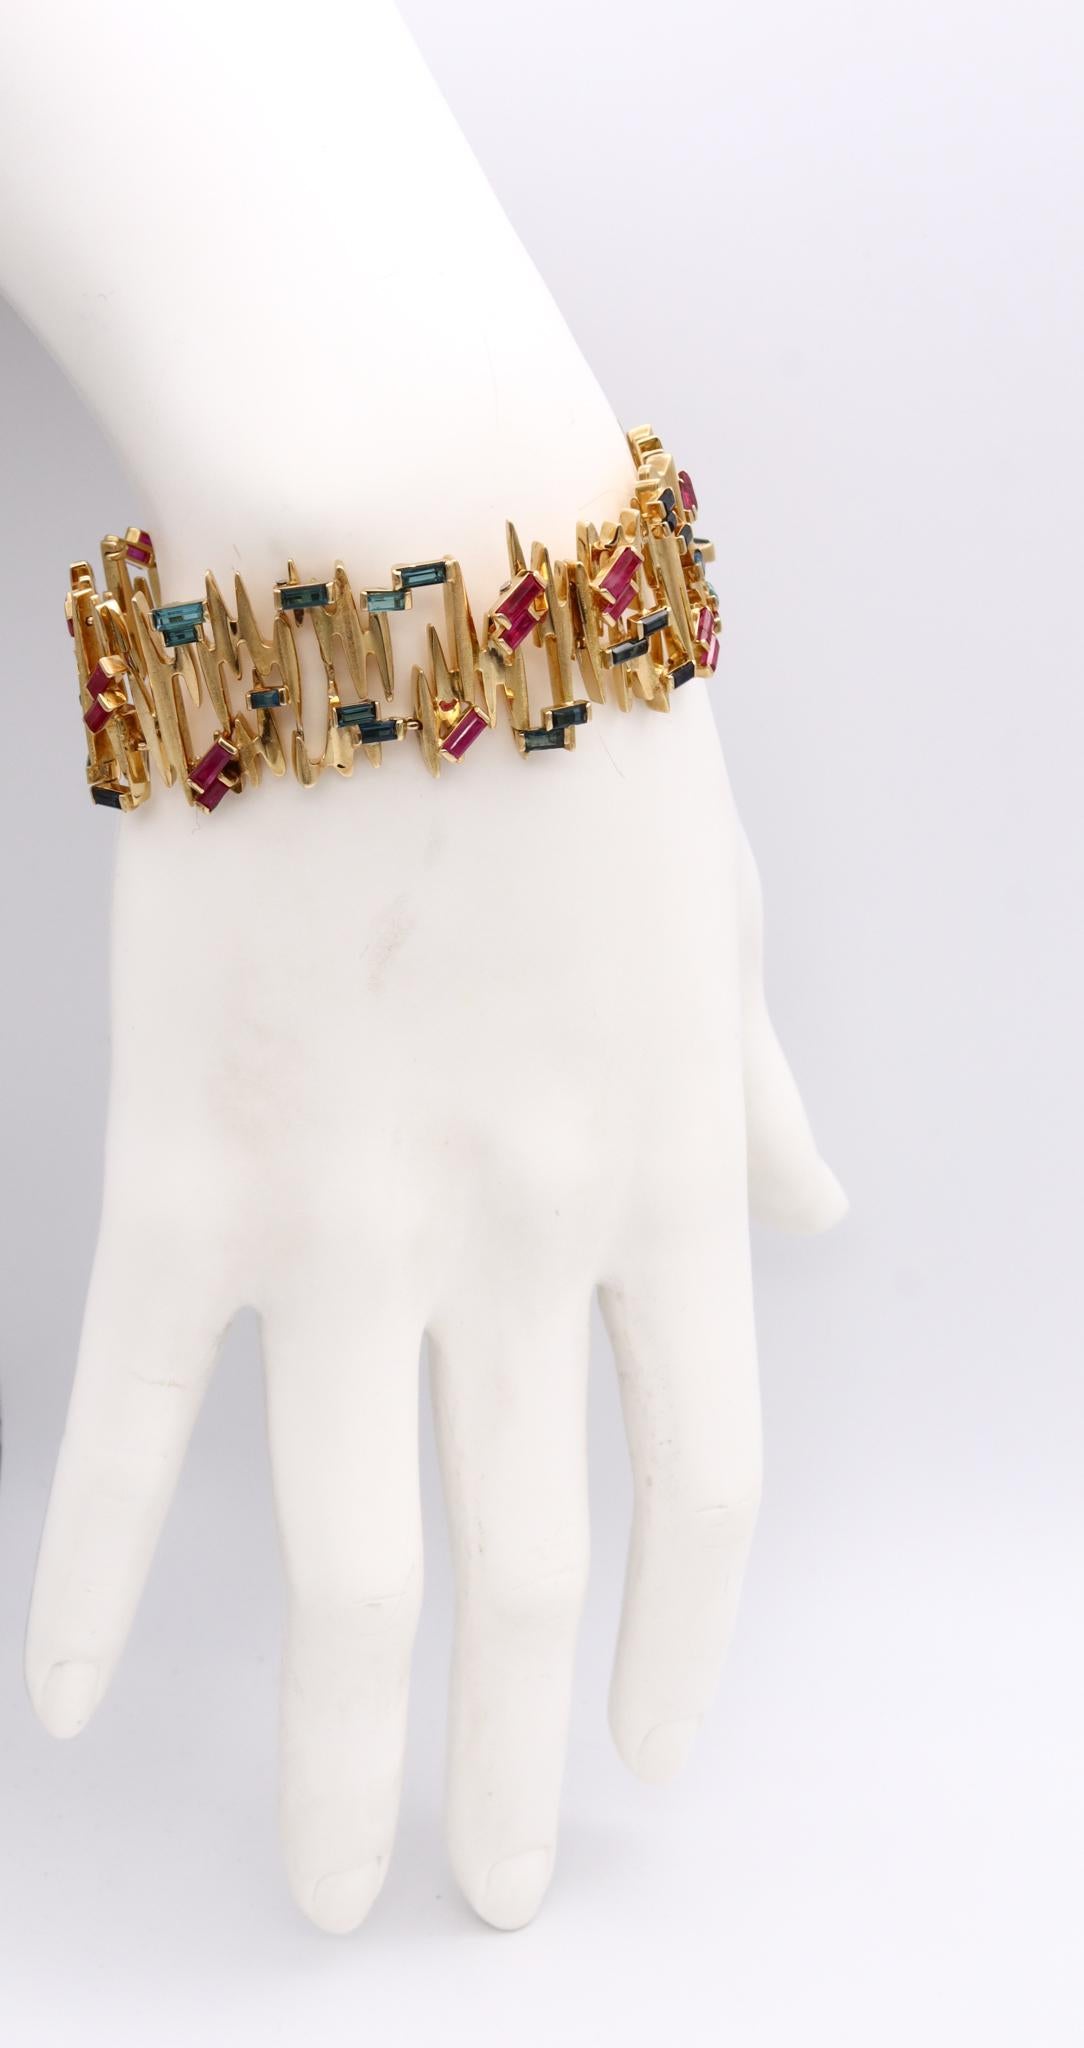 A jeweled bracelet designed by Gubelin.

Gorgeous piece that defines the brutalist jewelry style of the European post-war period. This wonderful bracelet has been created in Switzerland by the house of Gubelin at the beginning of the decade of the